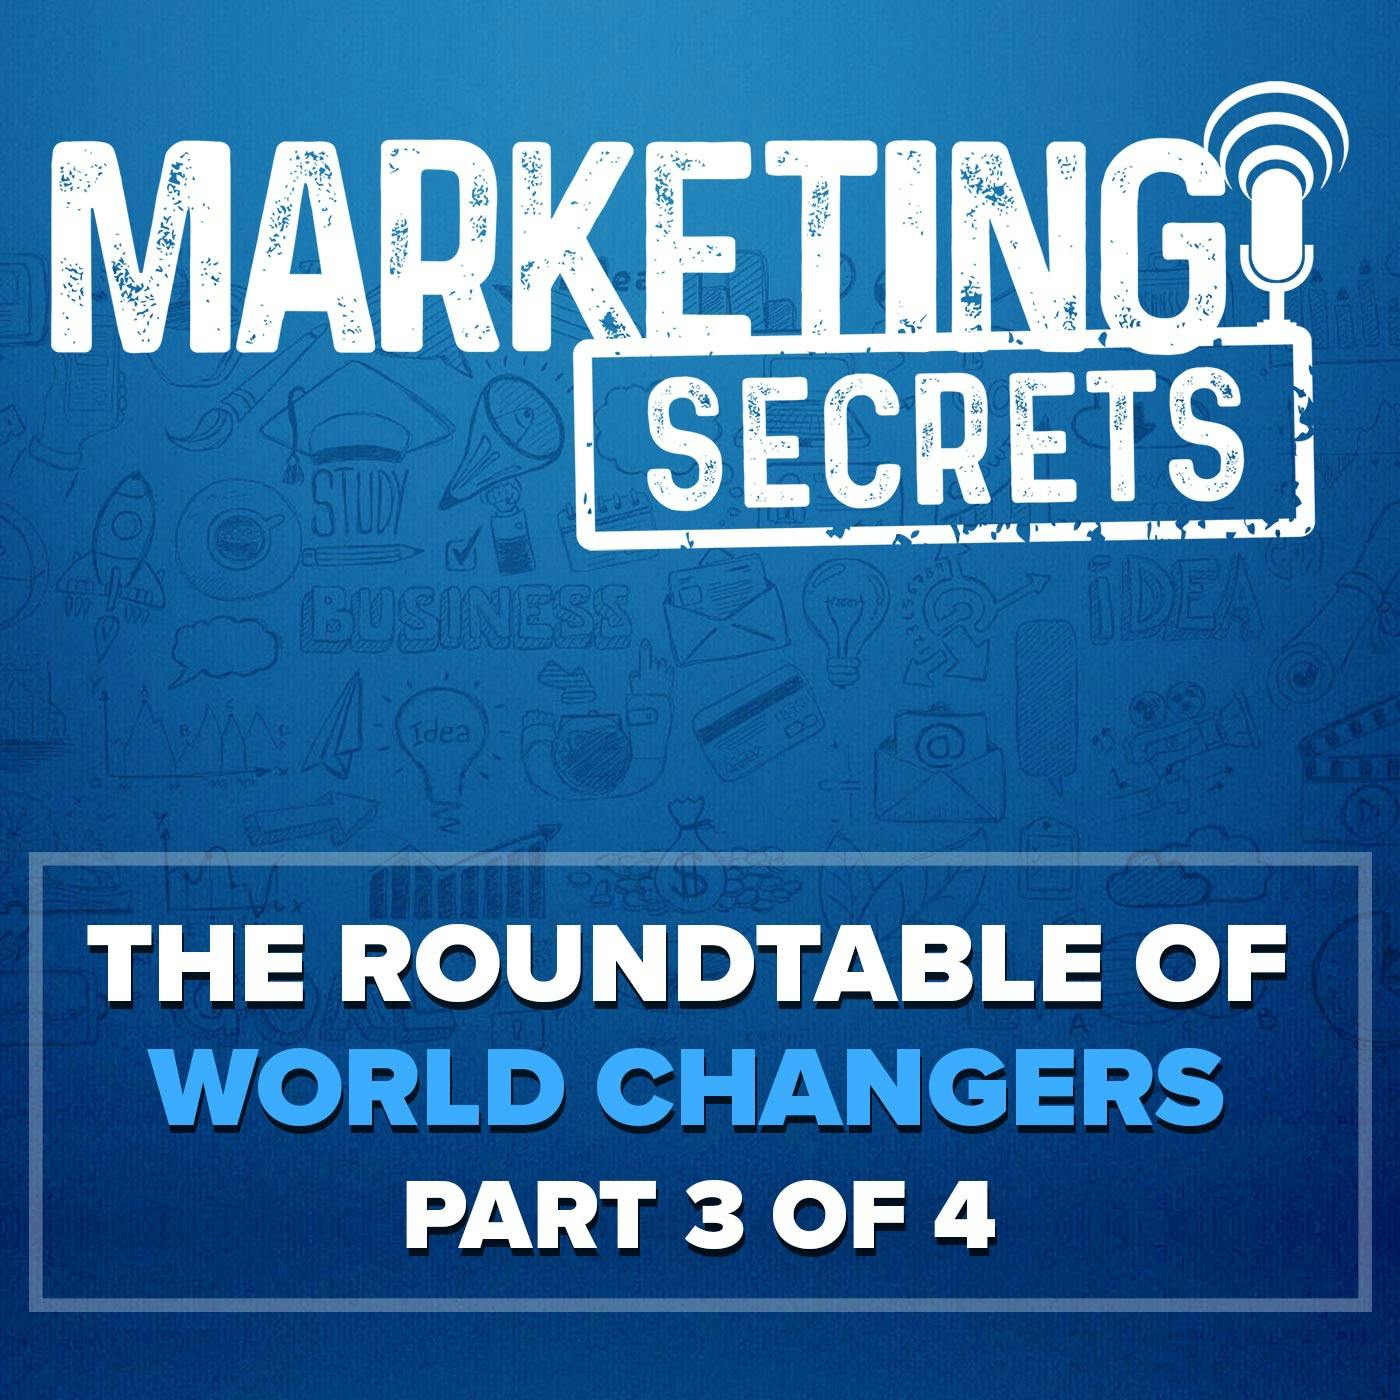 The Roundtable of World Changers (Part 3 of 4)